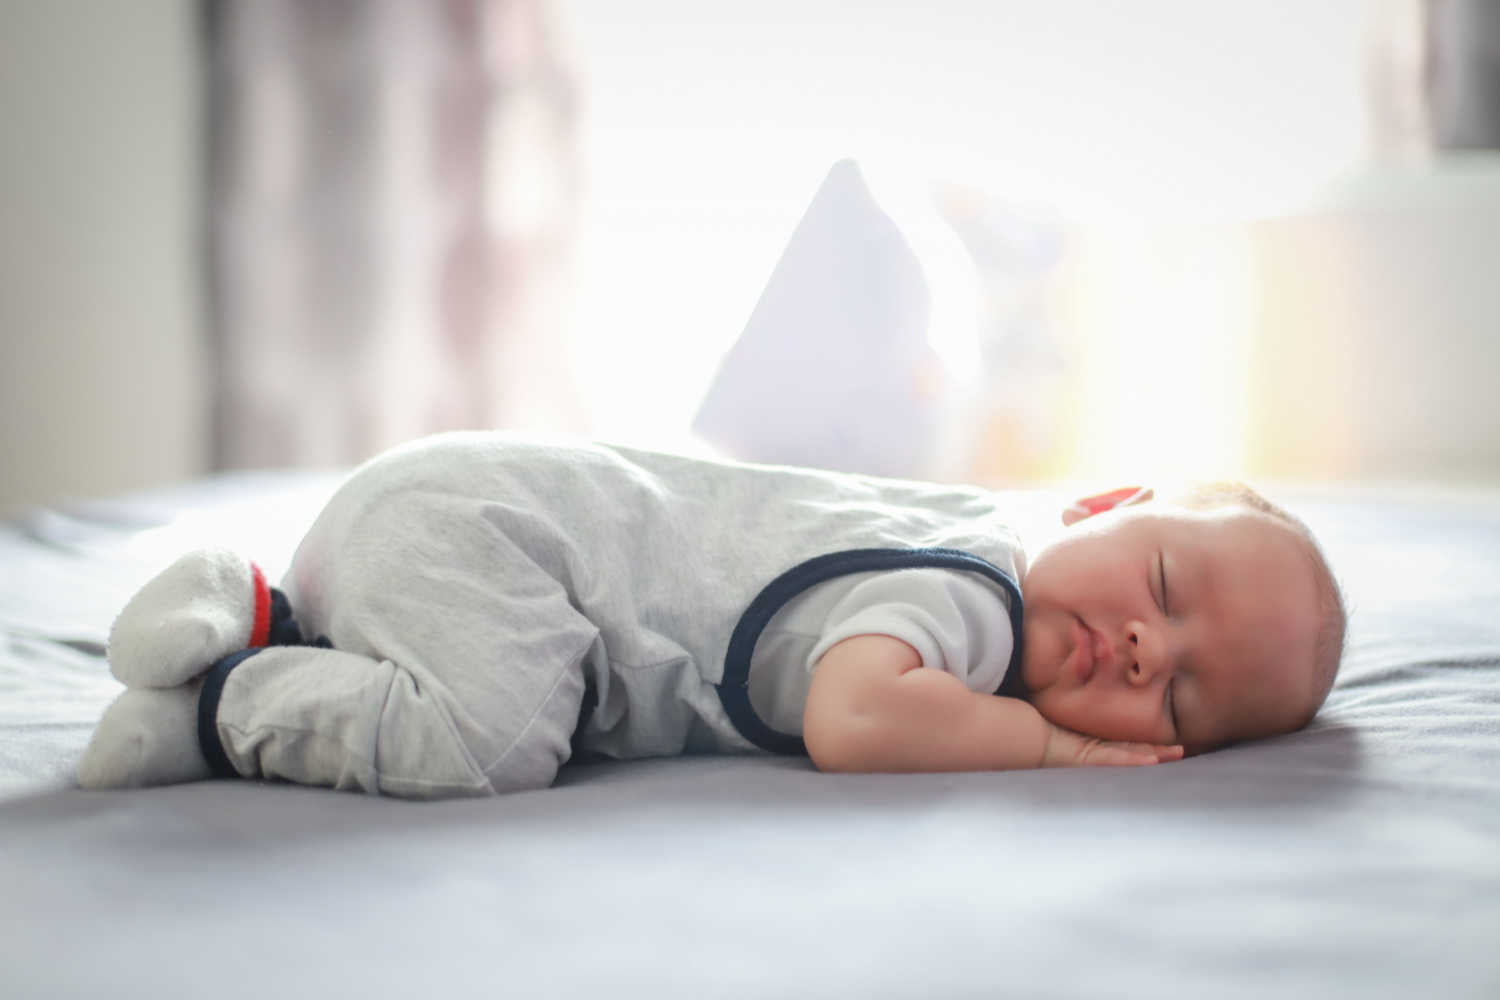 When Can Babies Sleep on Their Stomachs Safely?